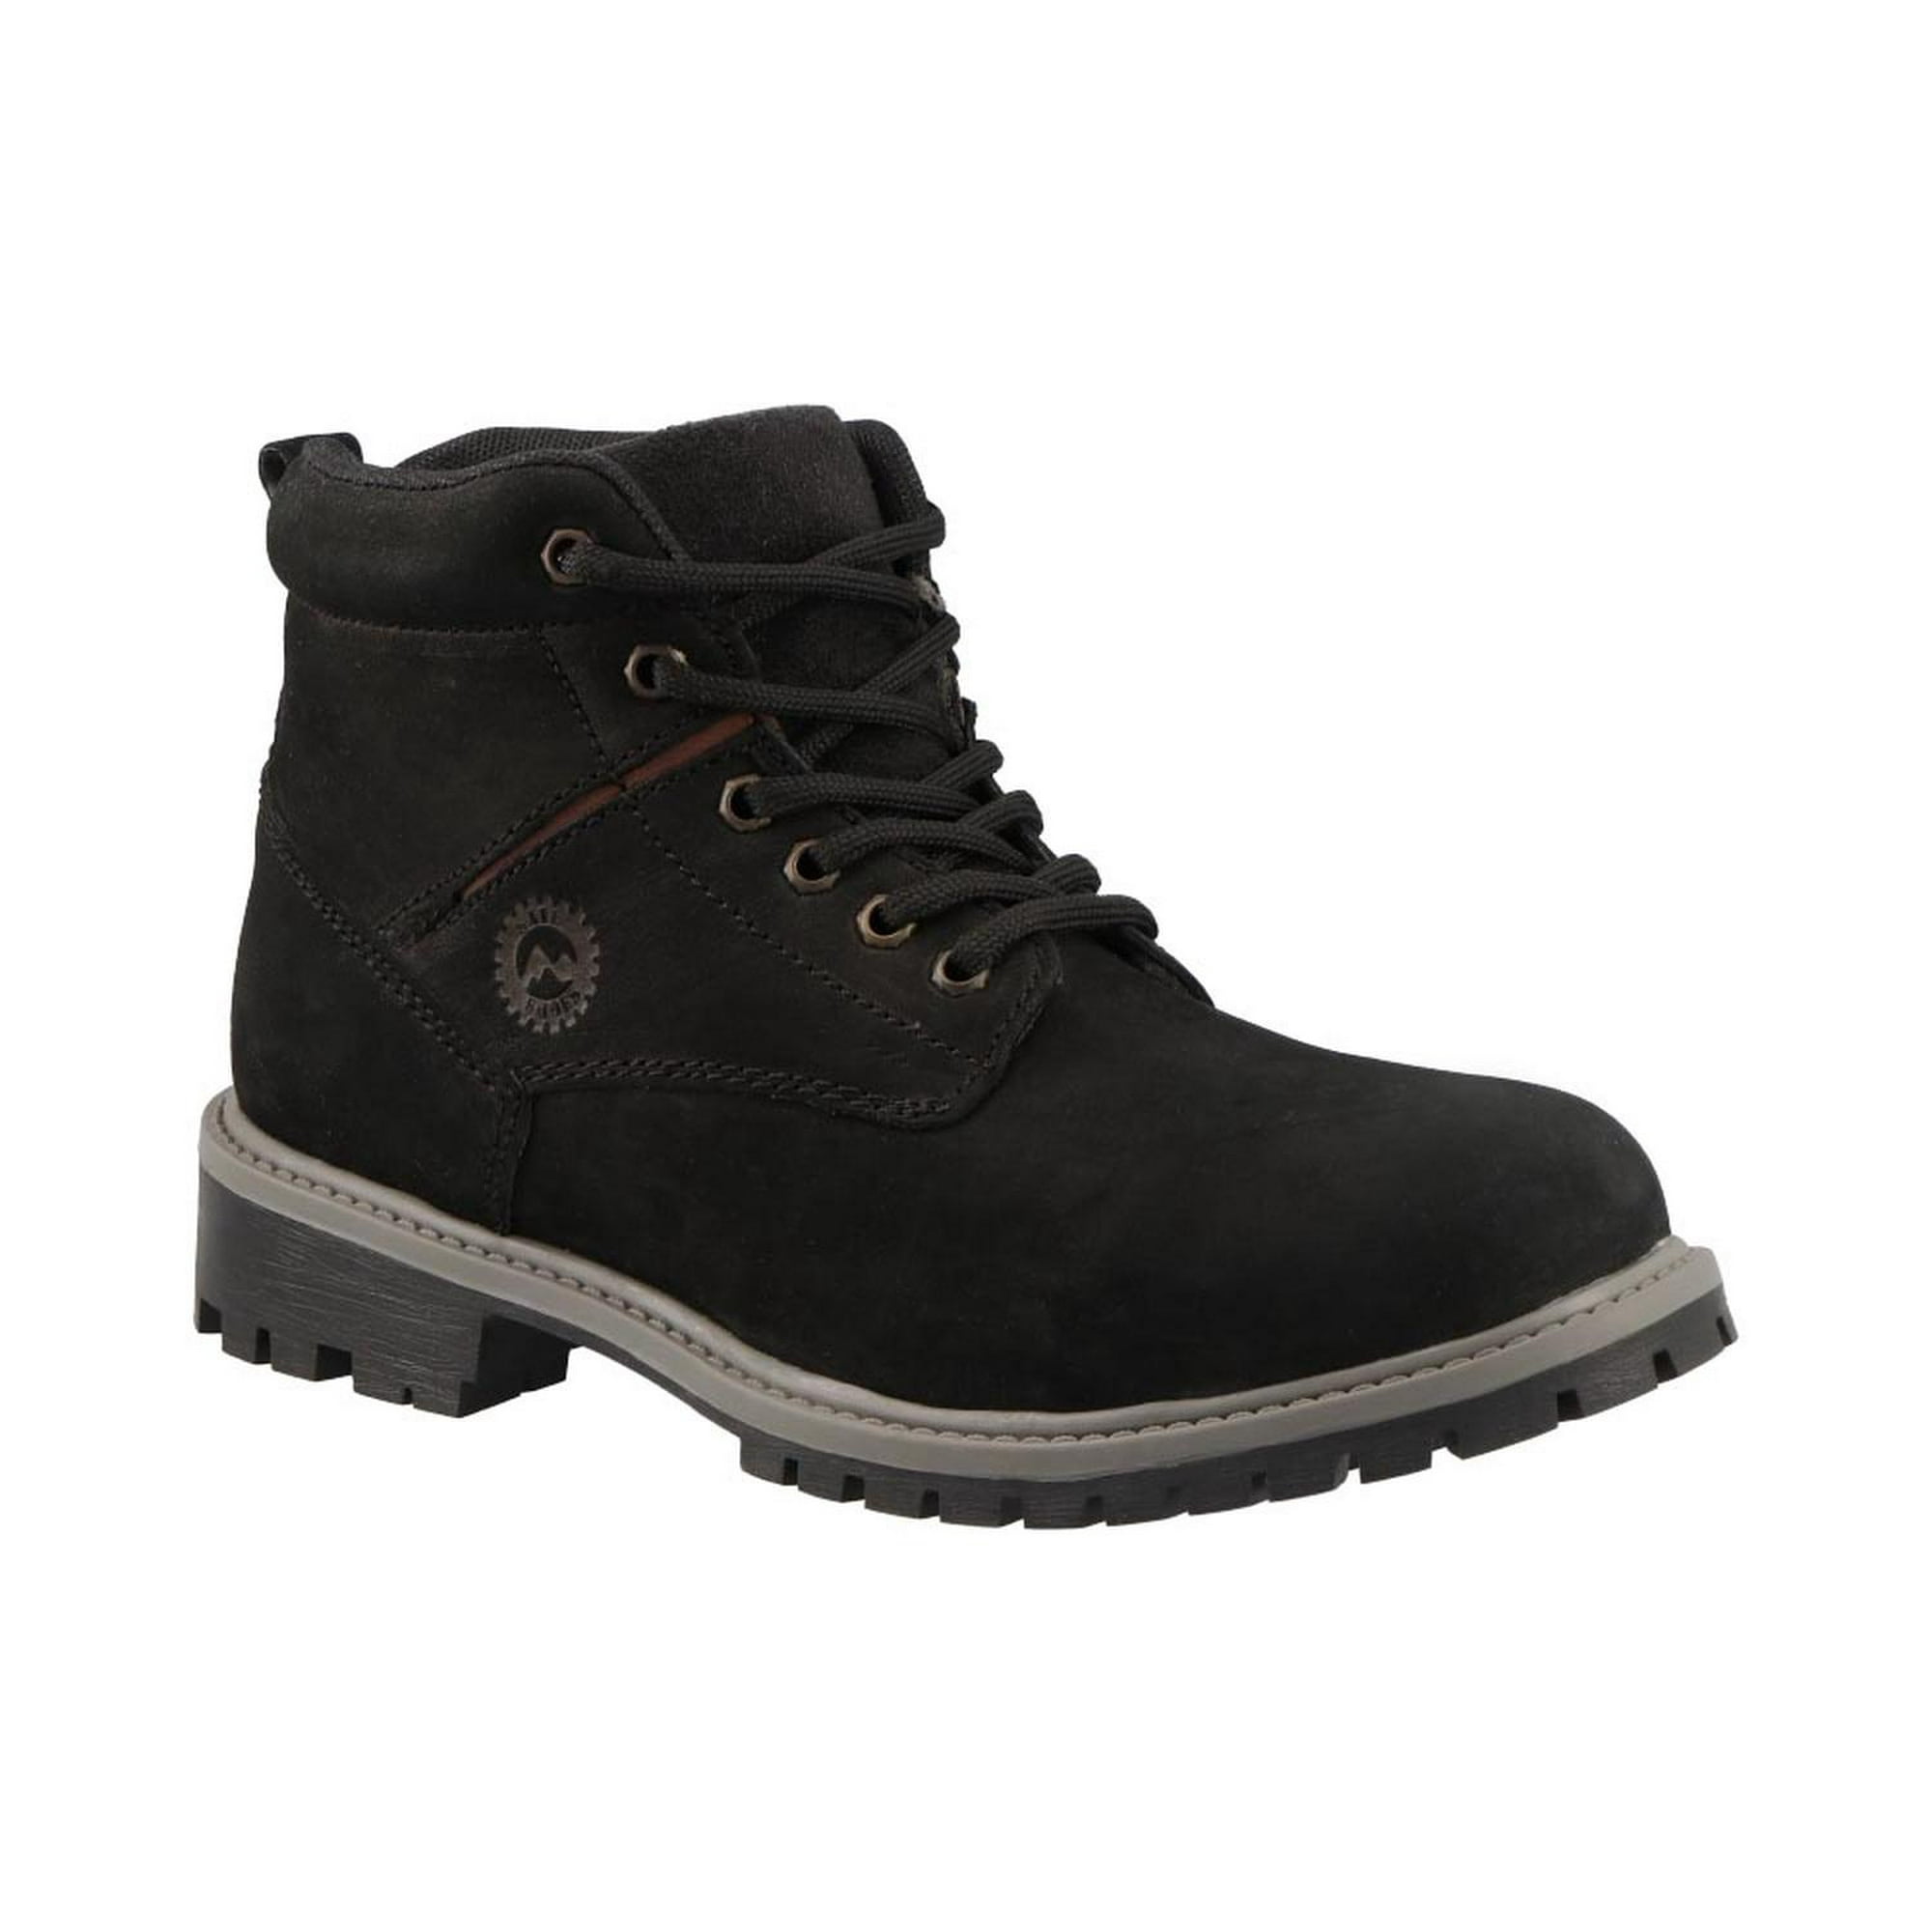 Bota casual industrial hombre sail casuales negro 26 sail 3935